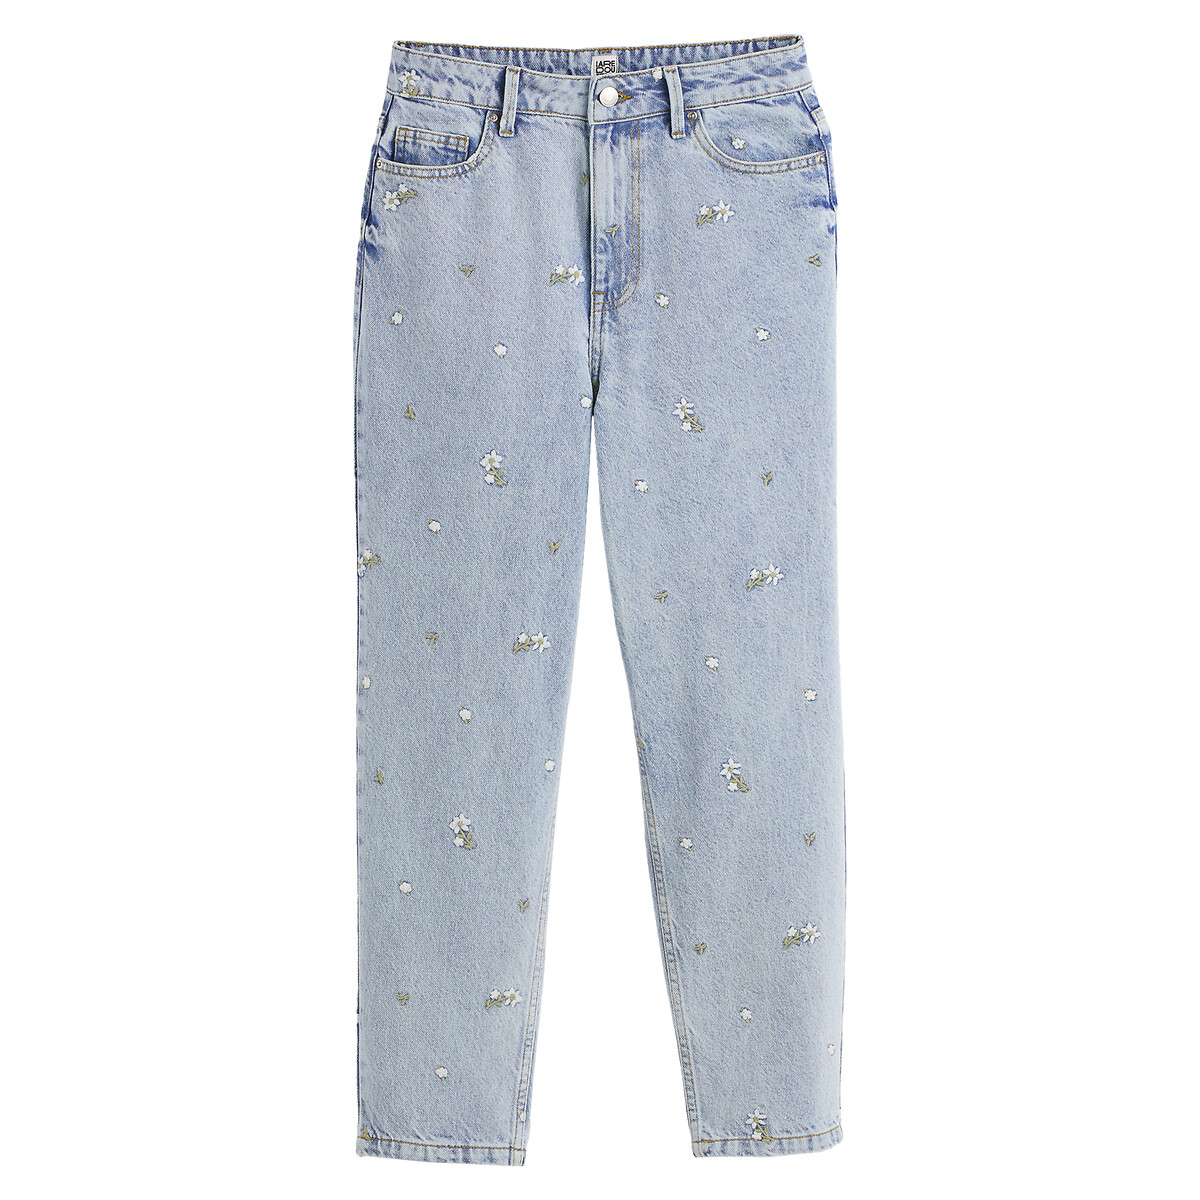 Embroidered Flower Mom Jeans with High Waist, Length 26"